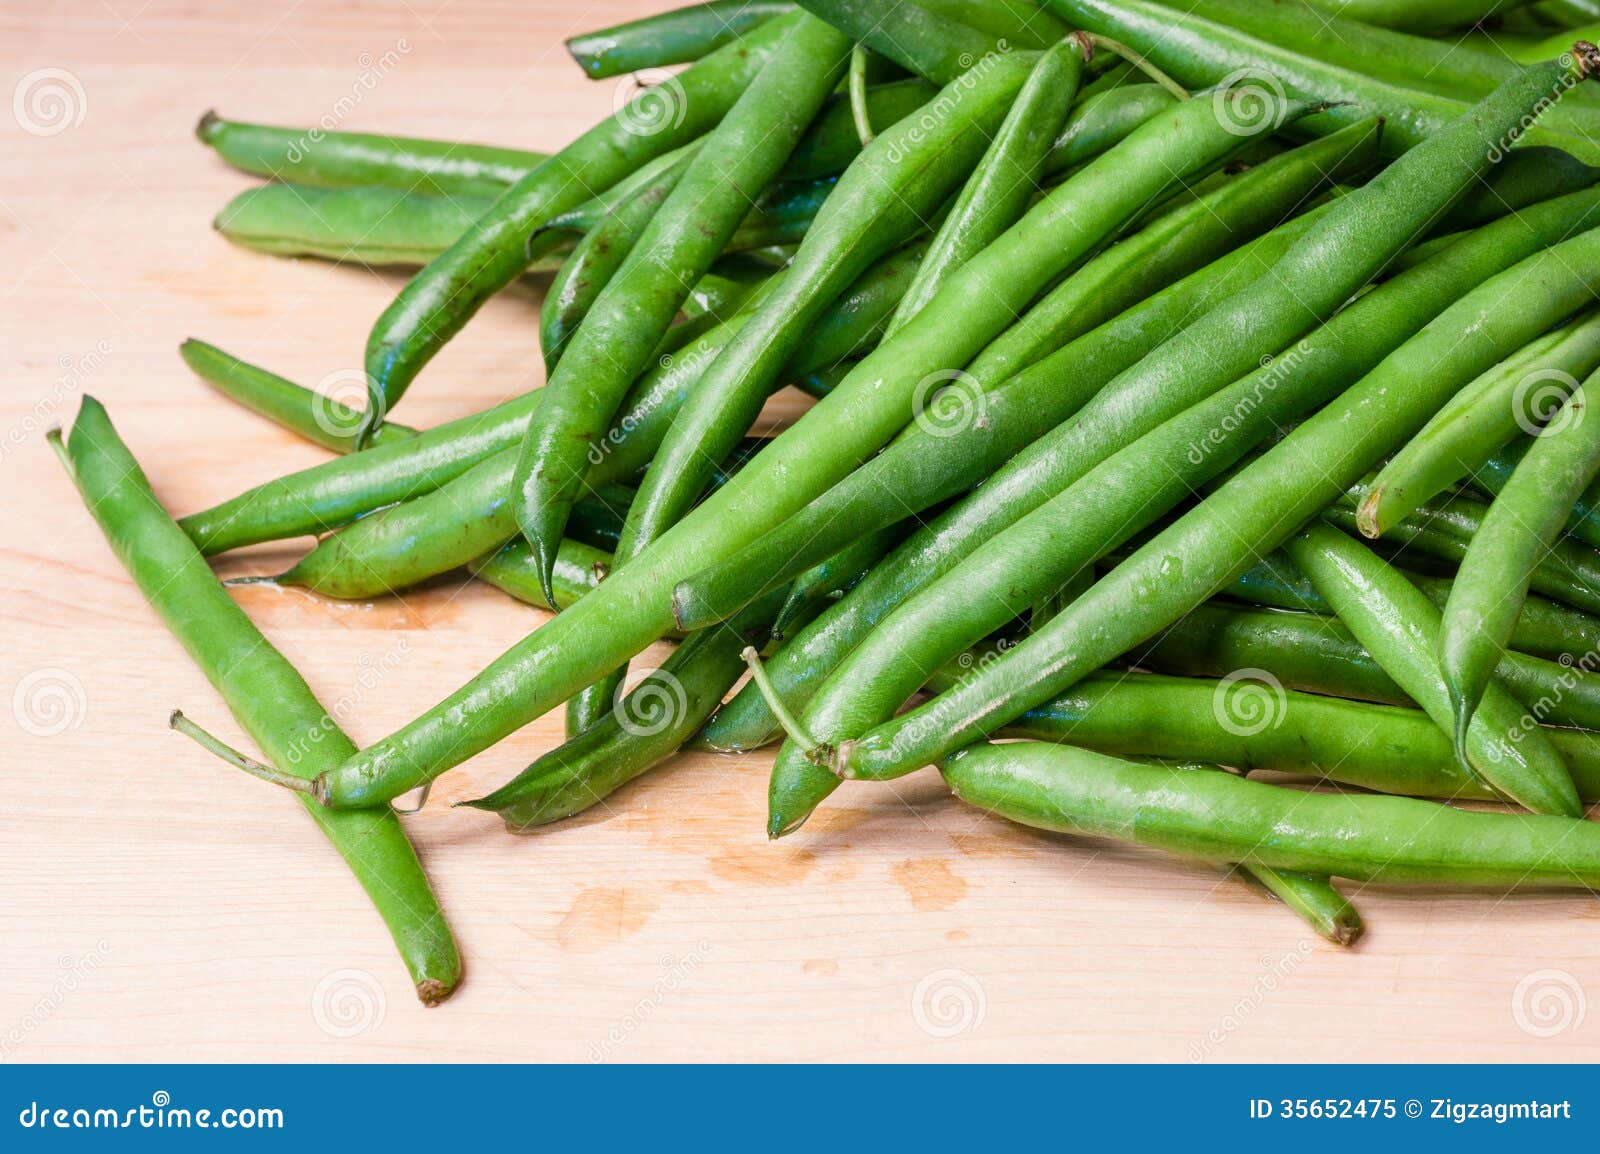 Green Beans on a Wooden Cutting Board Stock Image - Image of organic ...